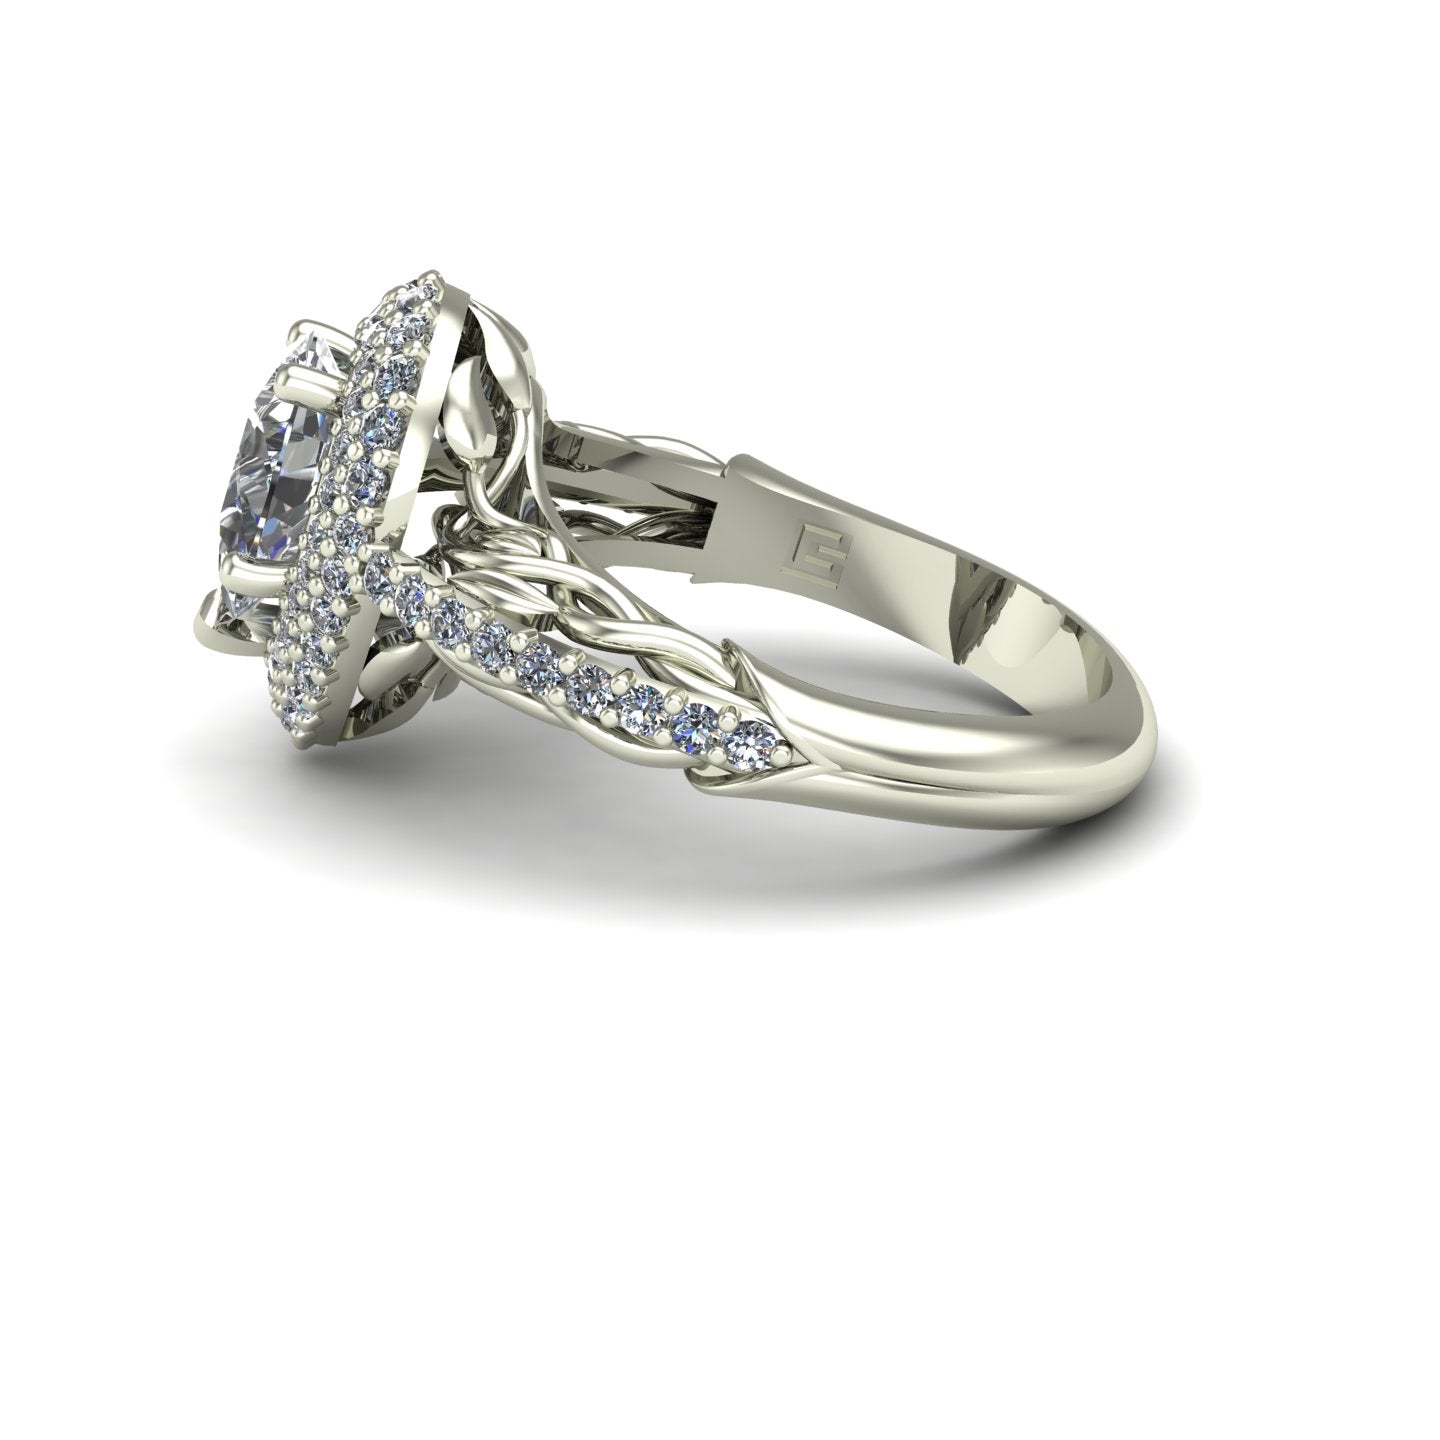 pear cut diamond double halo engagement ring with leaves and vines in 14k white gold - Charles Babb Designs - side view